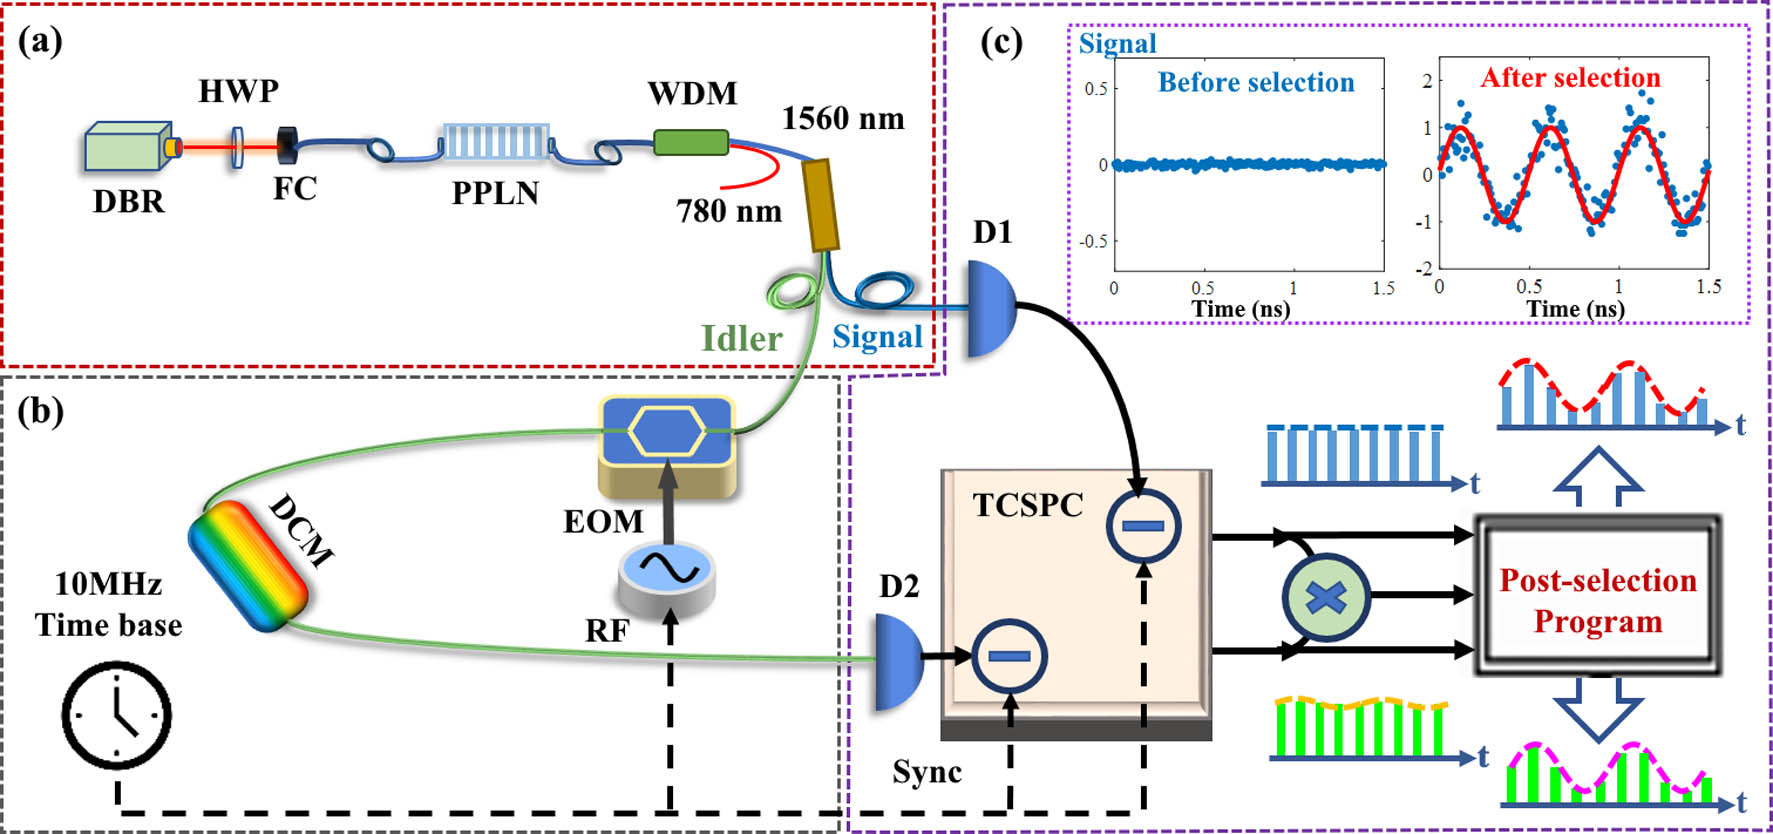 Experimental setup of the QMWP in a simulated RoF link. (a) depicts the setup for the generation of the utilized time-energy entangled biphoton source, and (b) plots the RoF link. The idler photons of the time-energy entangled biphoton source are modulated by a high-speed RF signal (ωRF) via the EOM and then transmitted through the DCM to simulate the RoF. (c) shows the setup for measurement and nonlocal recovery of the RF signal based on the QMWP method. The SNSPDs D1 and D2 are used to detect the arrived signal and idler photons. The TCSPC in the TTTR mode is used to record the time arrivals of the SNSPDs, and its sync input shares the same 10 MHz time base with the RF signal. The time differences between the individually recorded photon events and the relevant last sync event measure the photon waveforms over time. Based on the auxiliary cross-correlation searching program, the coincidence between the recorded signal and the idler photon events is acquired and used for the post-selection. The inset of (c) plots the direct and coincidence-assisted measurement of the signal photon waveforms.